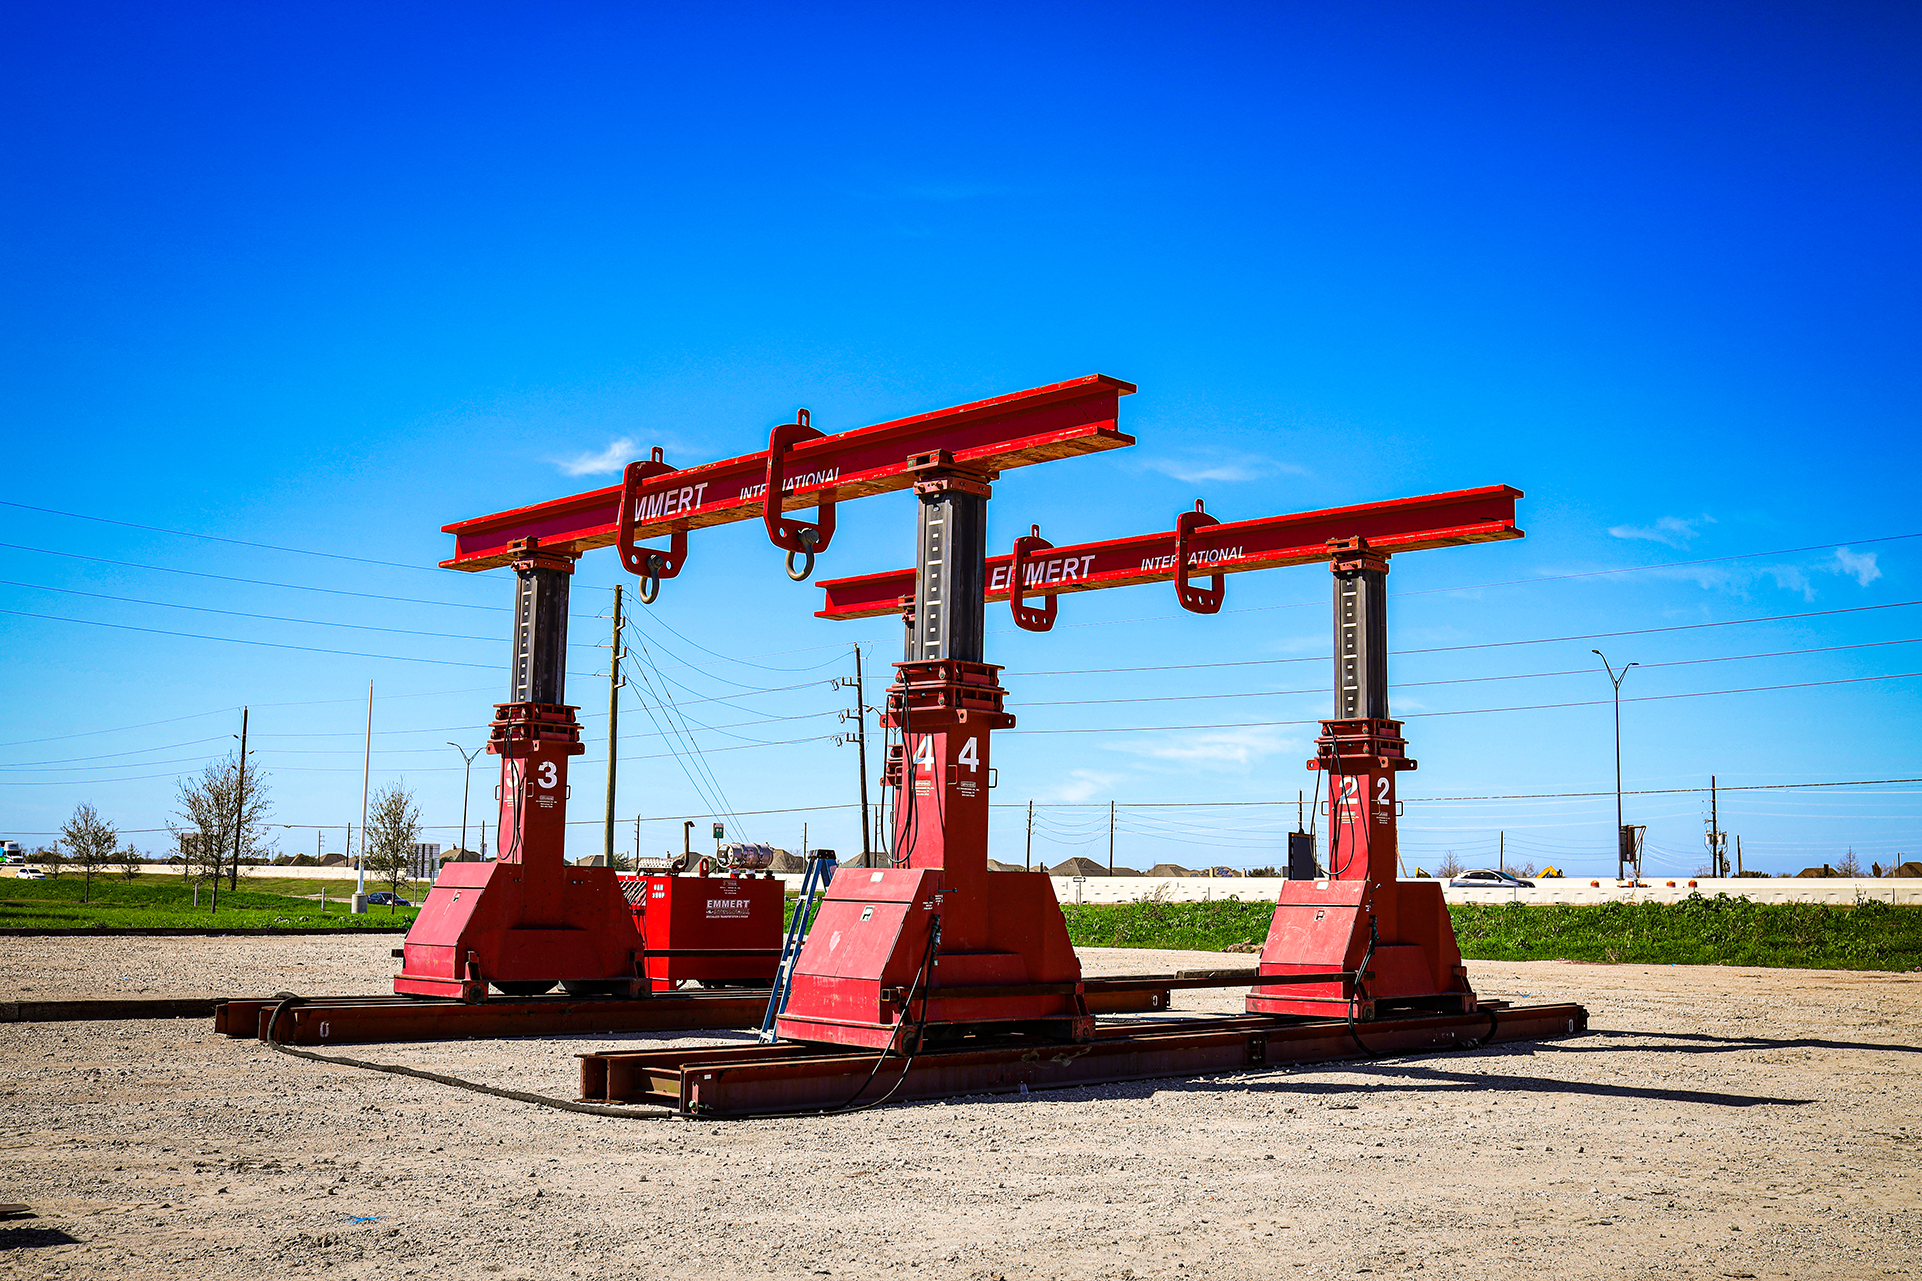 A pair of large red mobile lifts that can extend a horizontal red beam with large sets of fastening rings